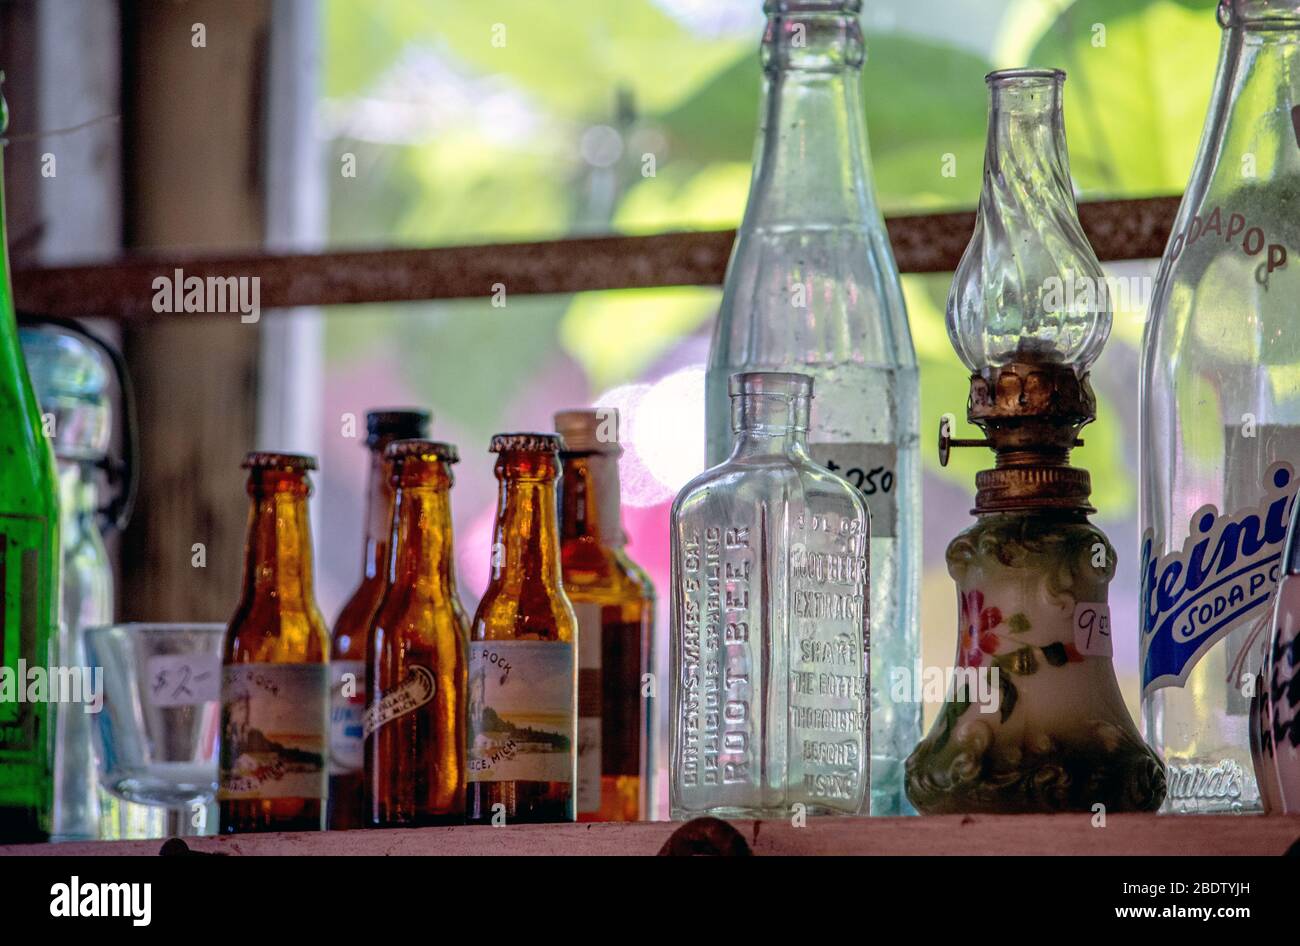 antique lamps and bottles in a window Stock Photo